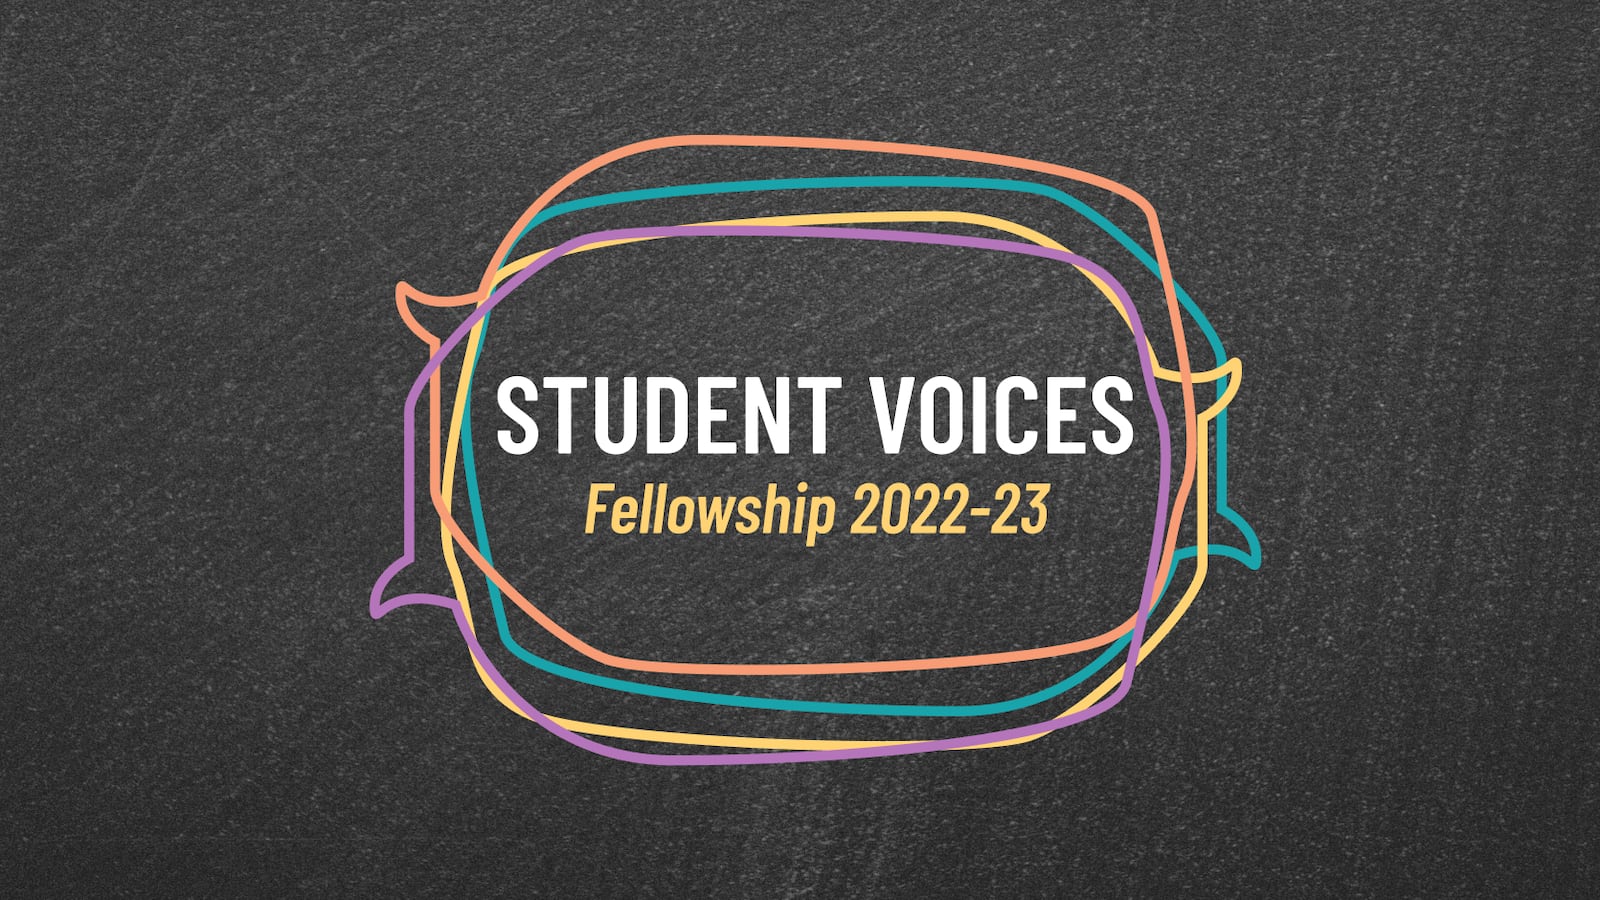 The words “Student Voices Fellowship 2022-23” inside conversation bubbles on a black background. 